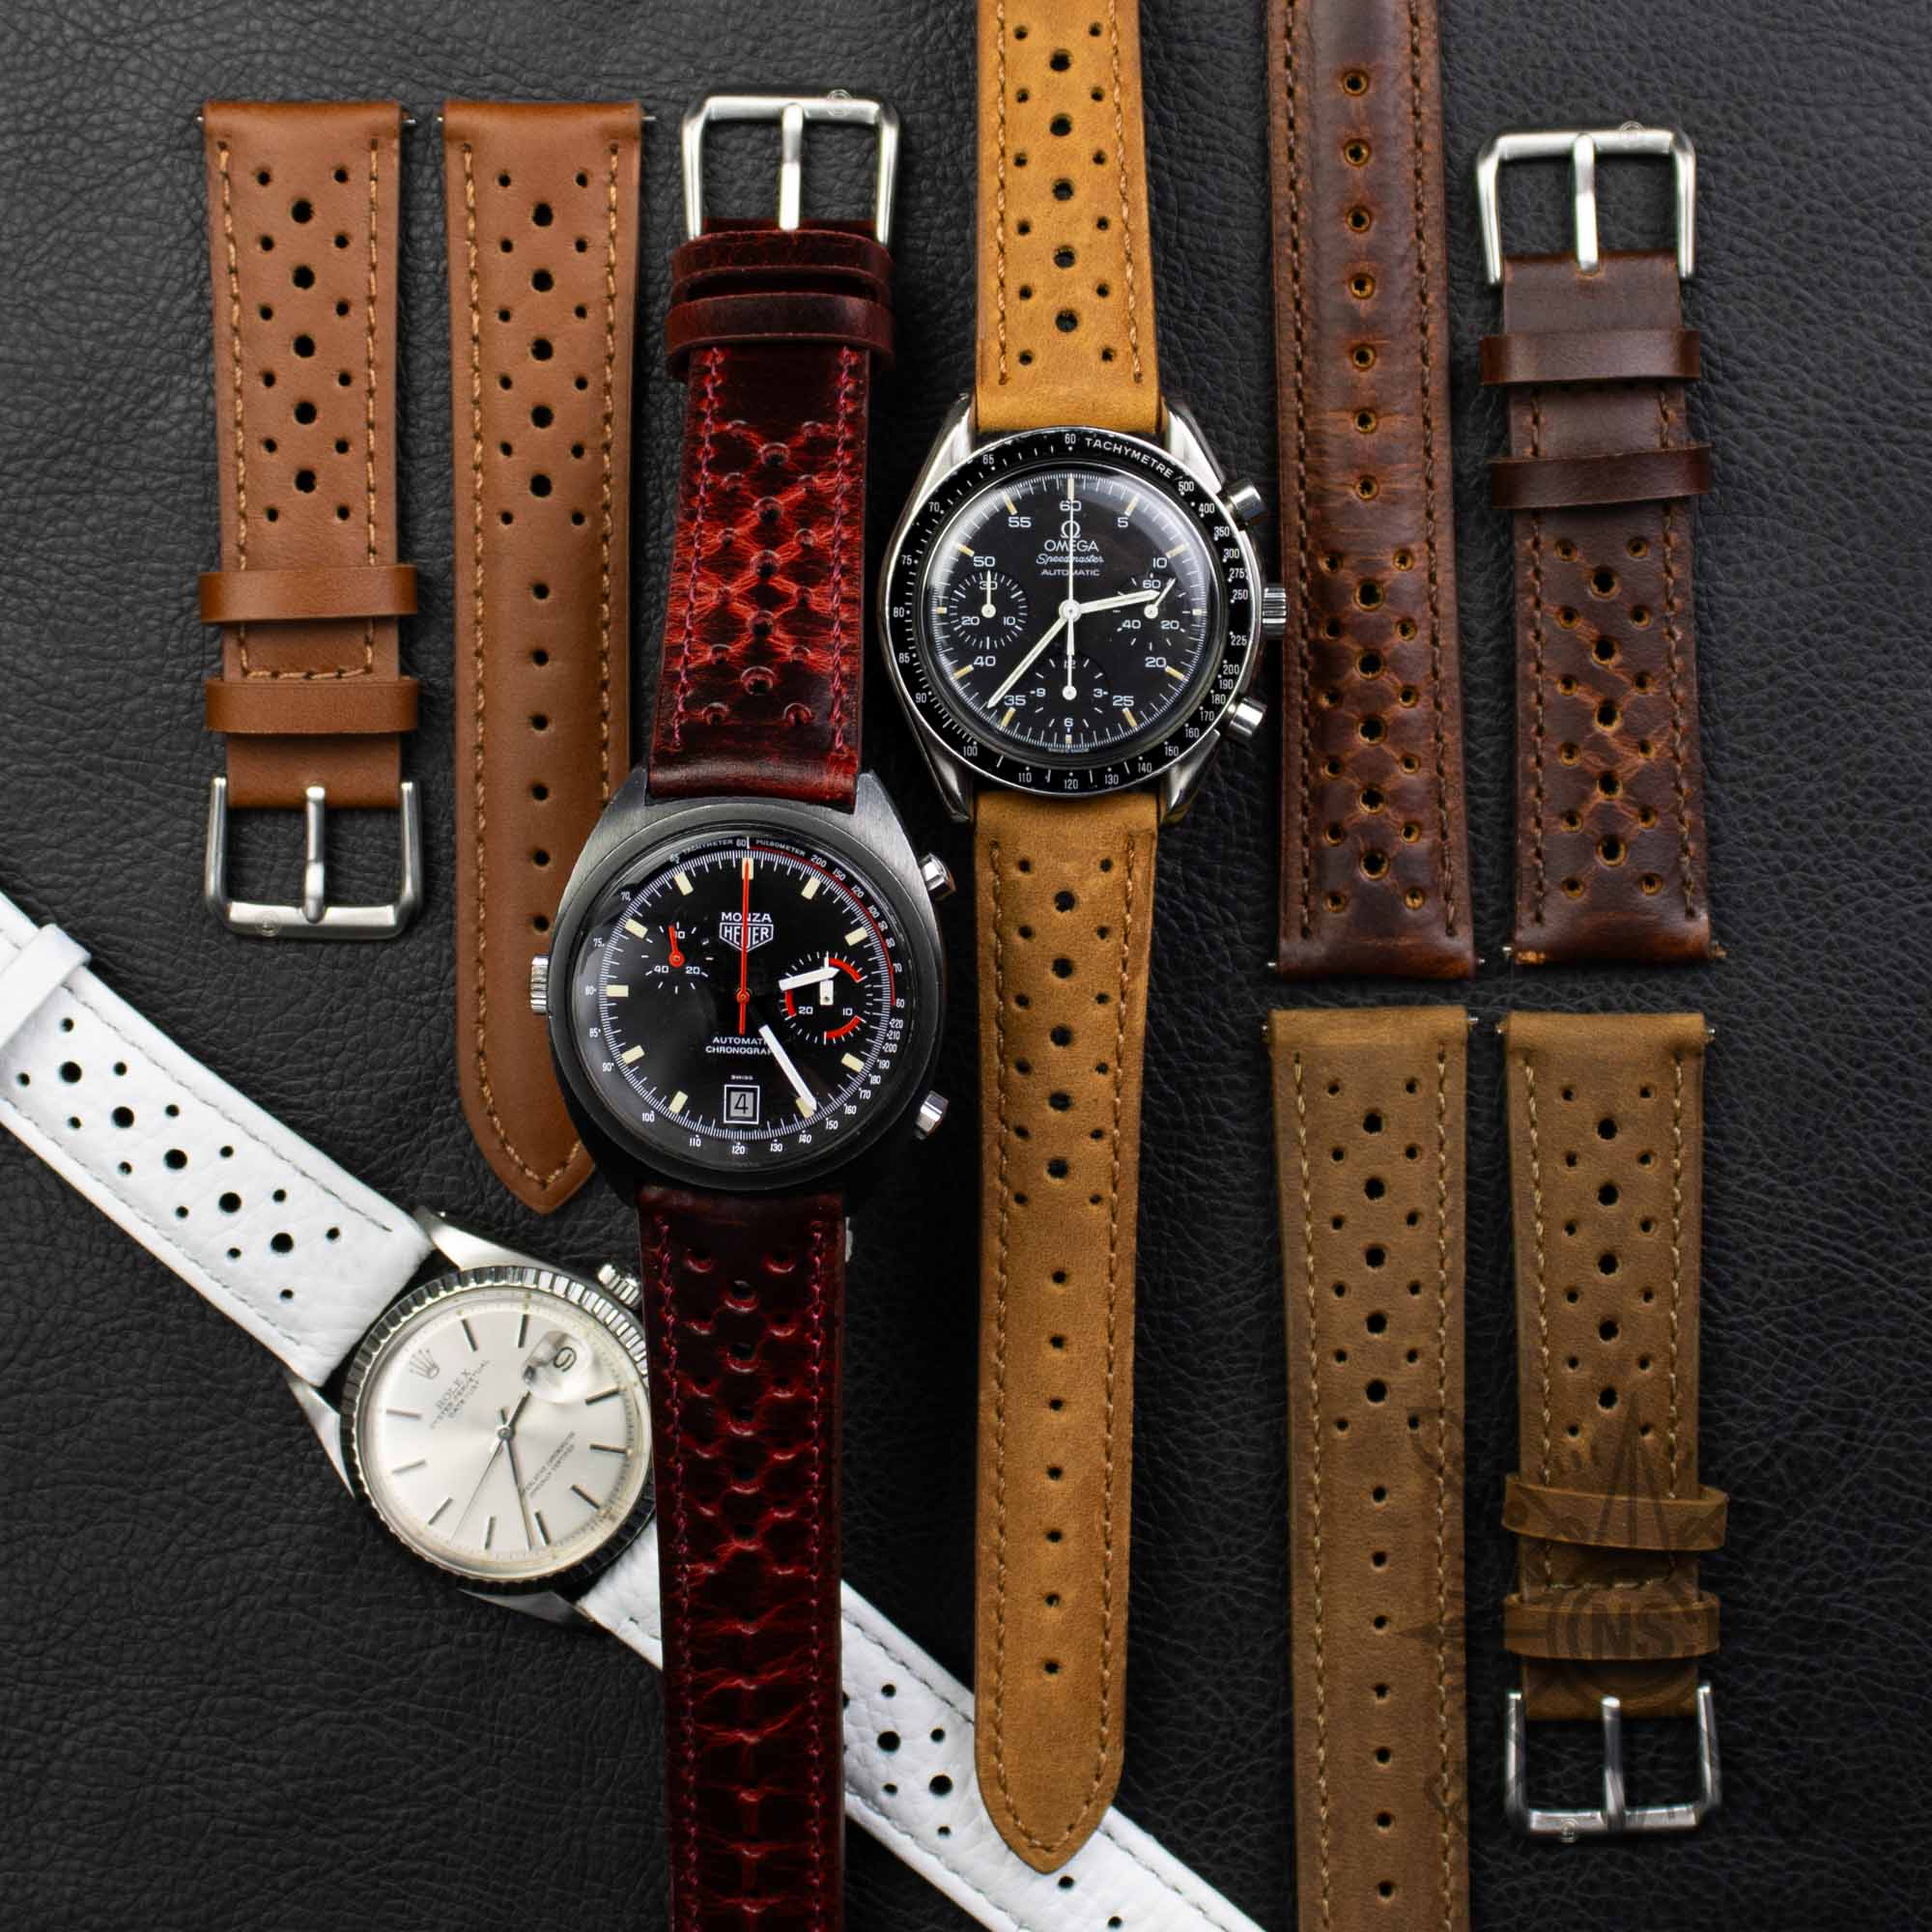 Racing watch straps